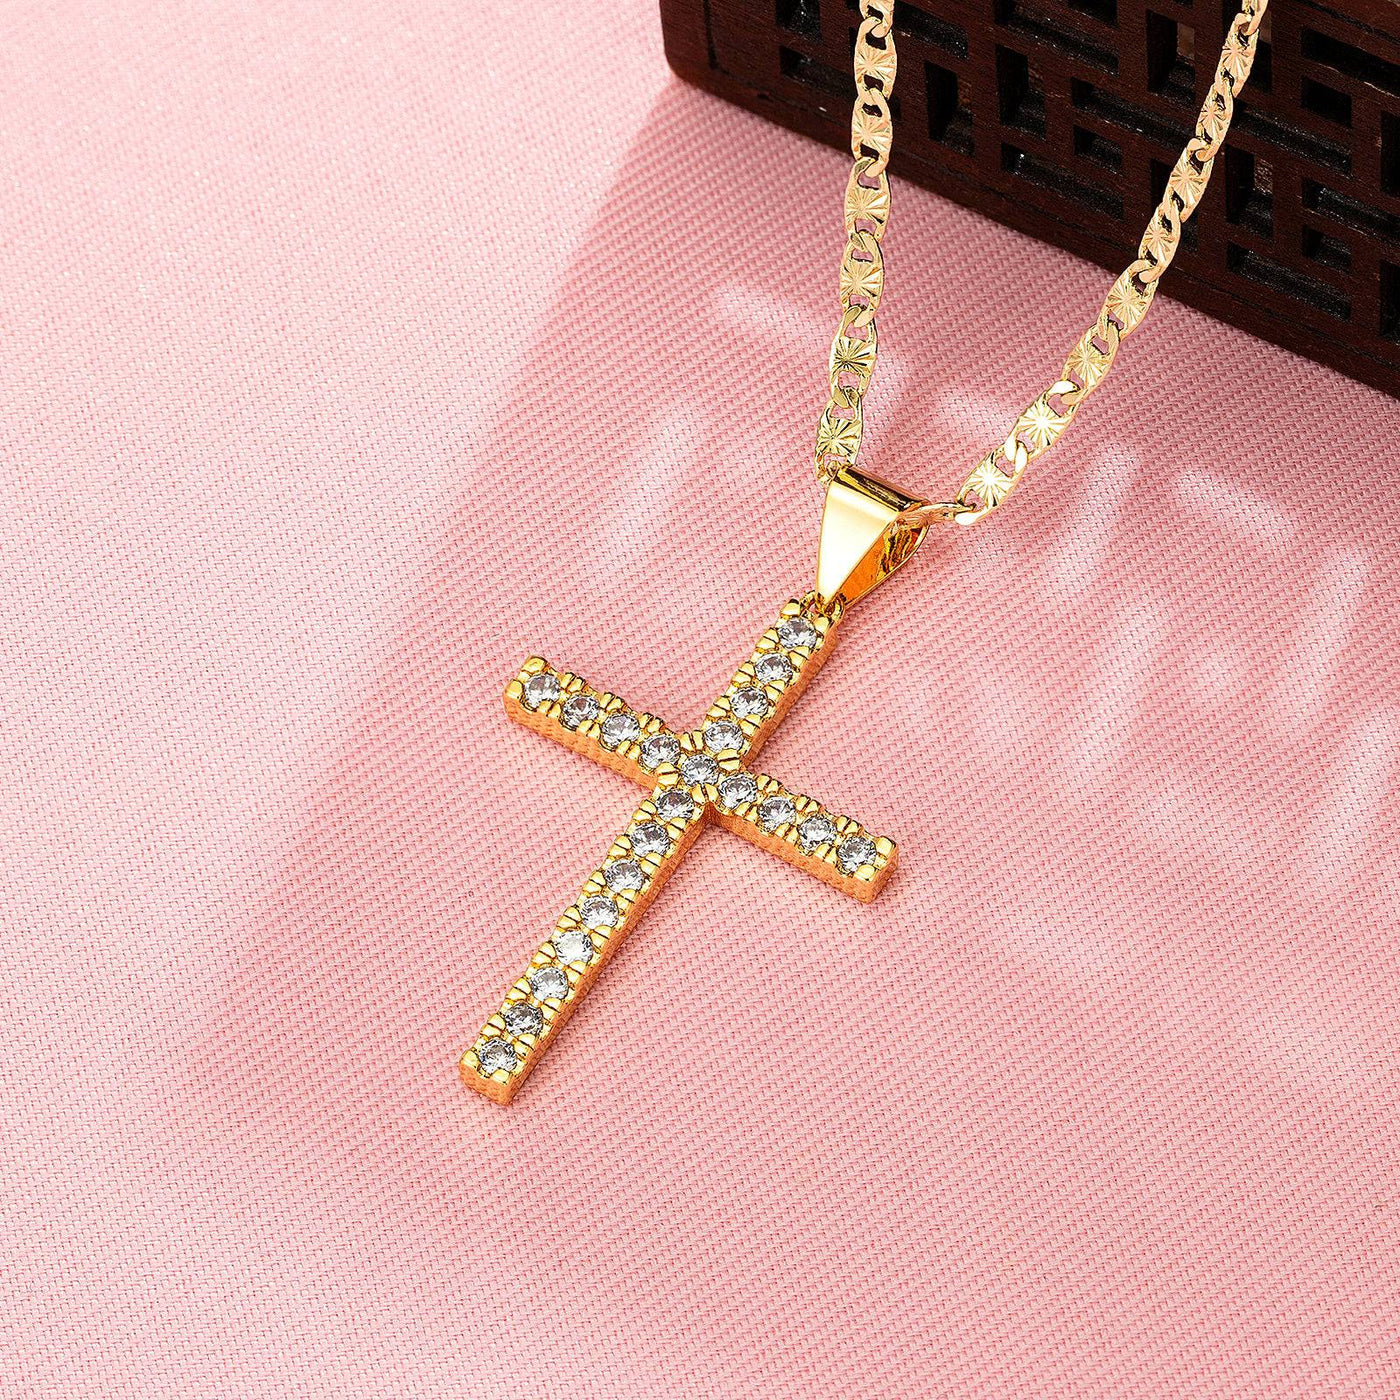 Thin Cross CZ 14K Gold Filled Necklace - Luxe & Co. Jewelry